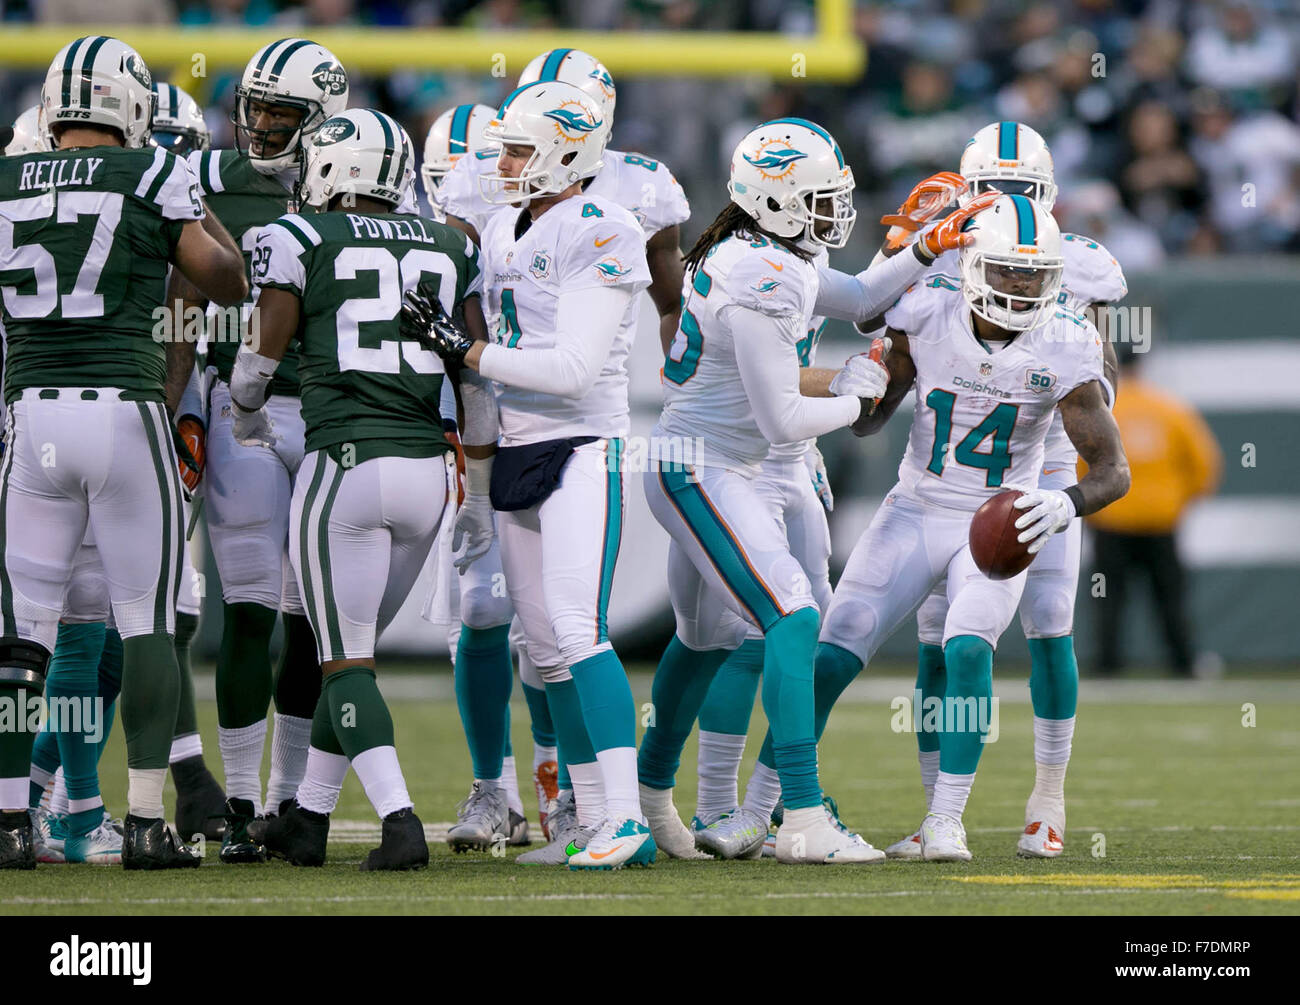 Dolphins WR Jarvis Landry pokes fun at Patriots on TD celebration